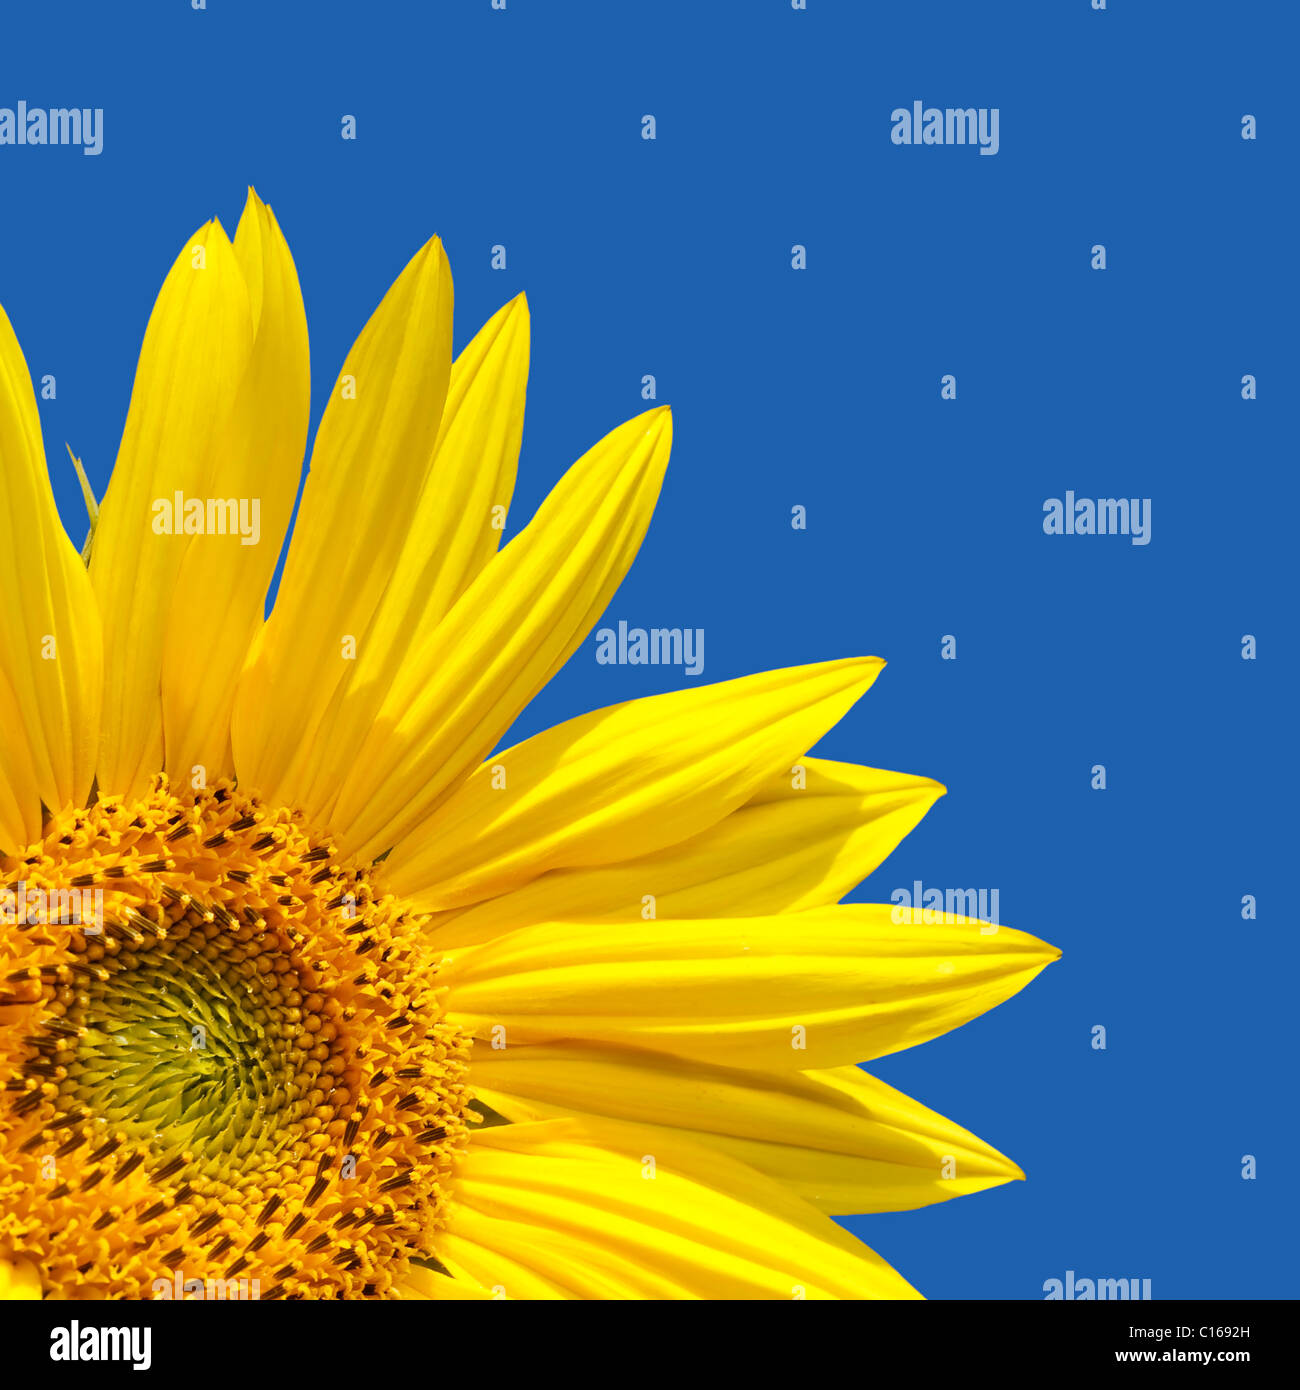 Sunflower template with sunflower in the corner with lots of blue sky. The blue is a solid colour, easily extended. Stock Photo